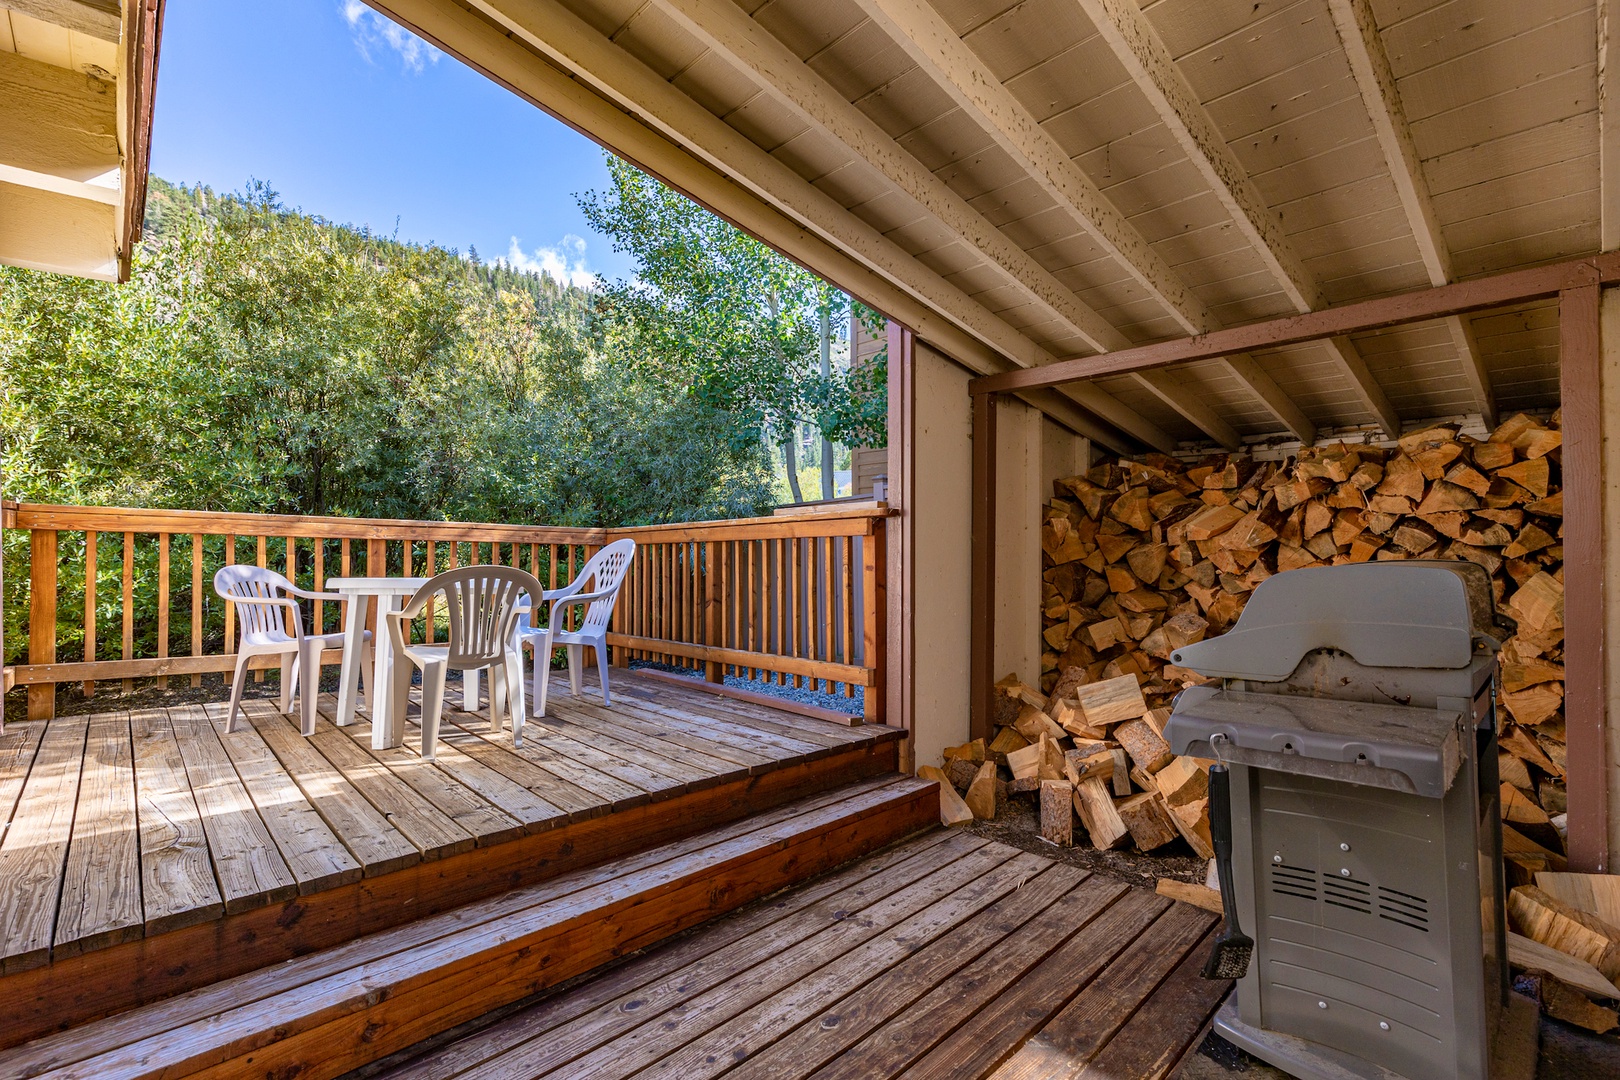 BBQ, firewood and seating area